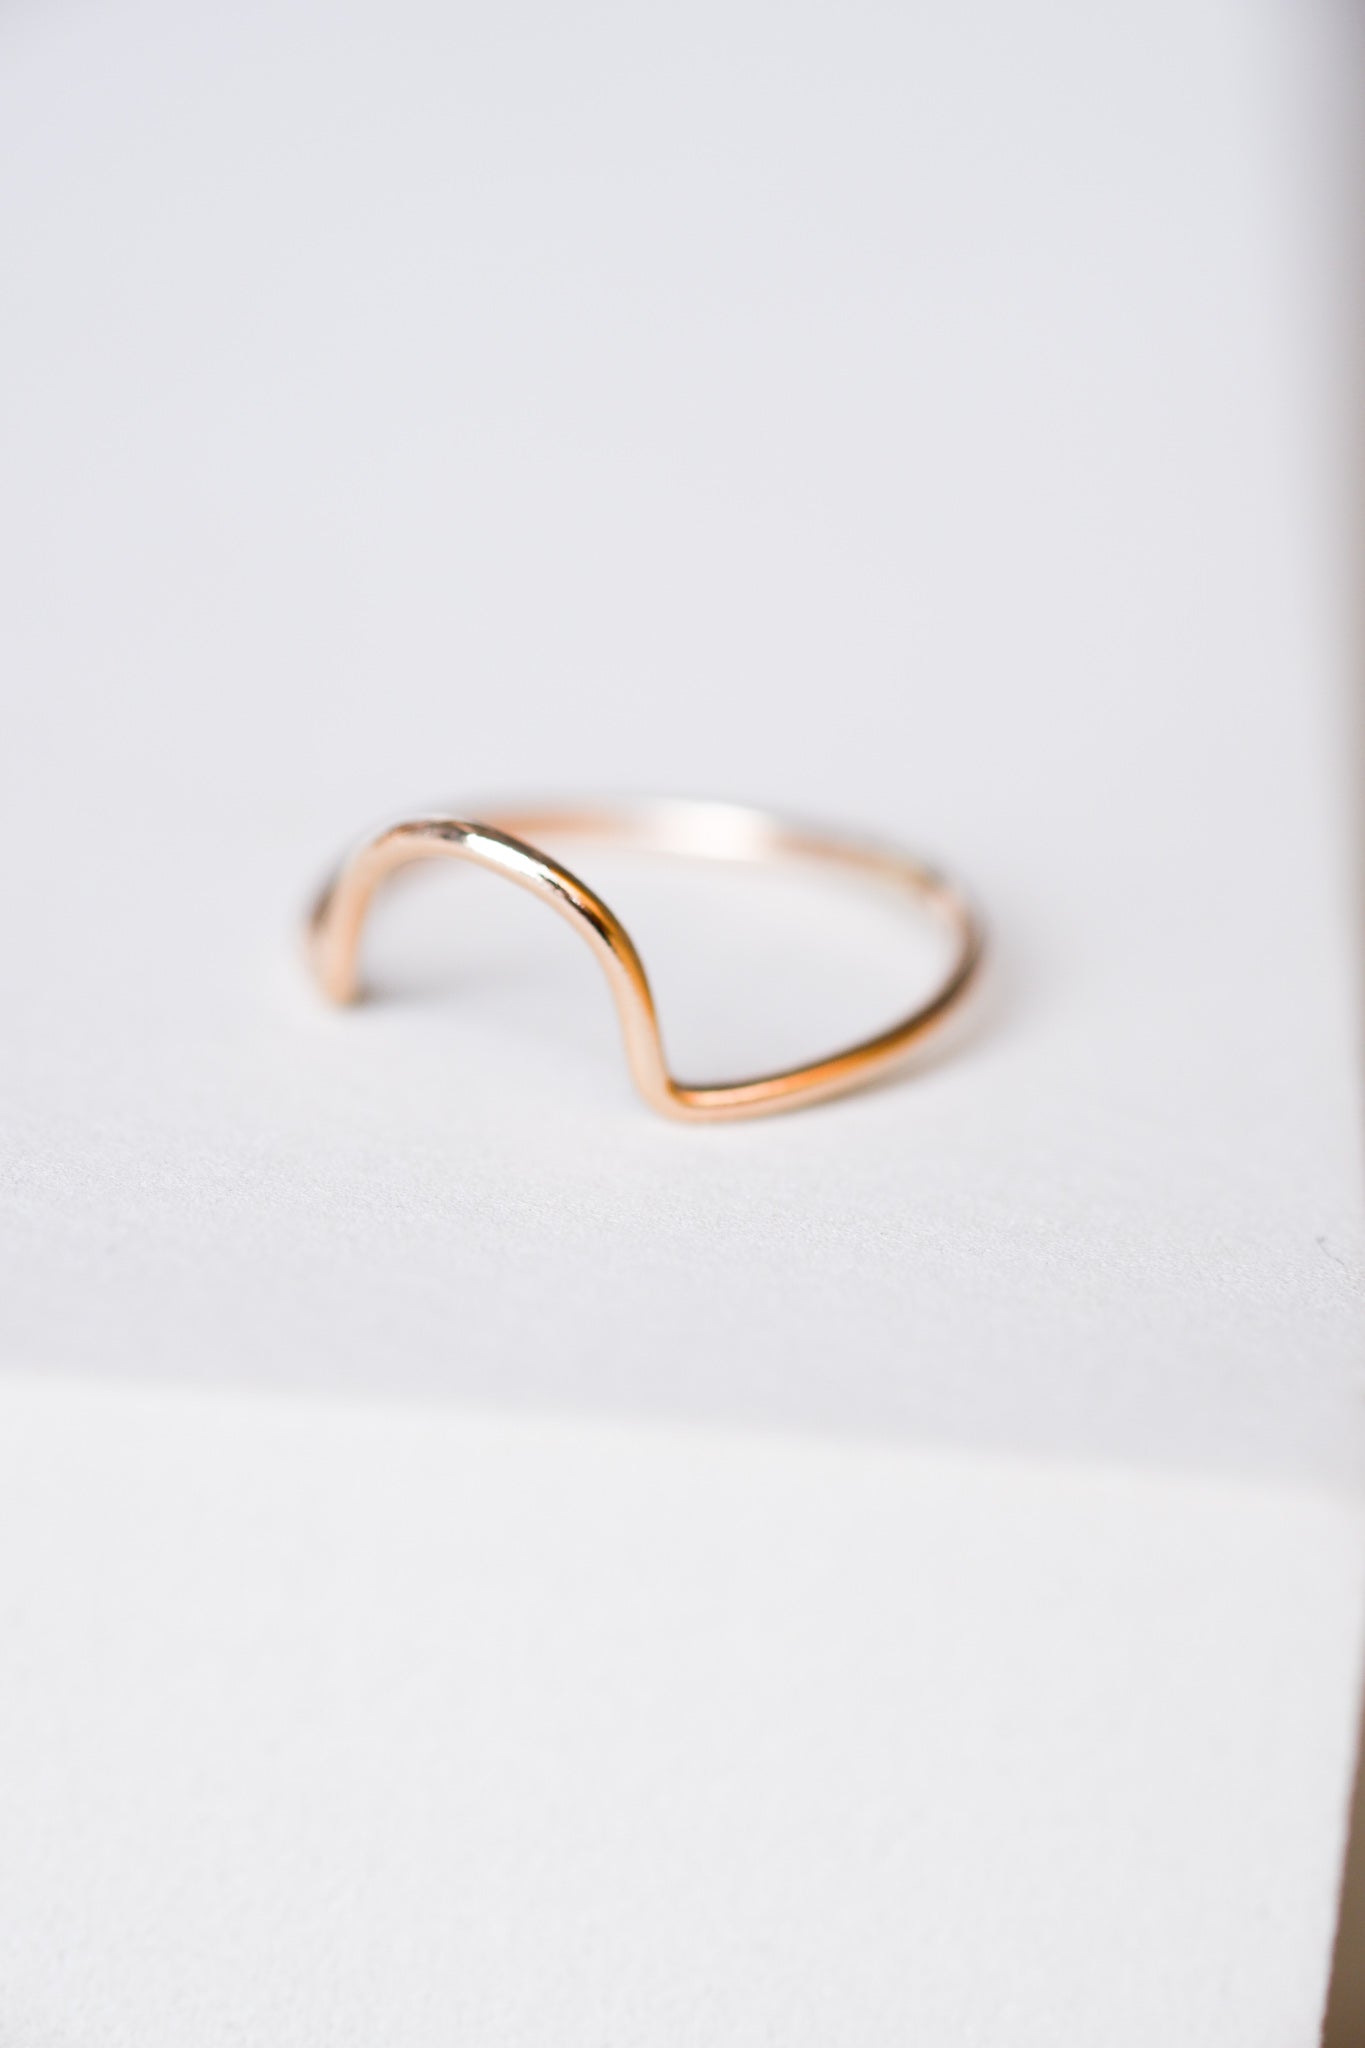 Gold filled stacking rings, handmade, minimalistic and made for everyday wear